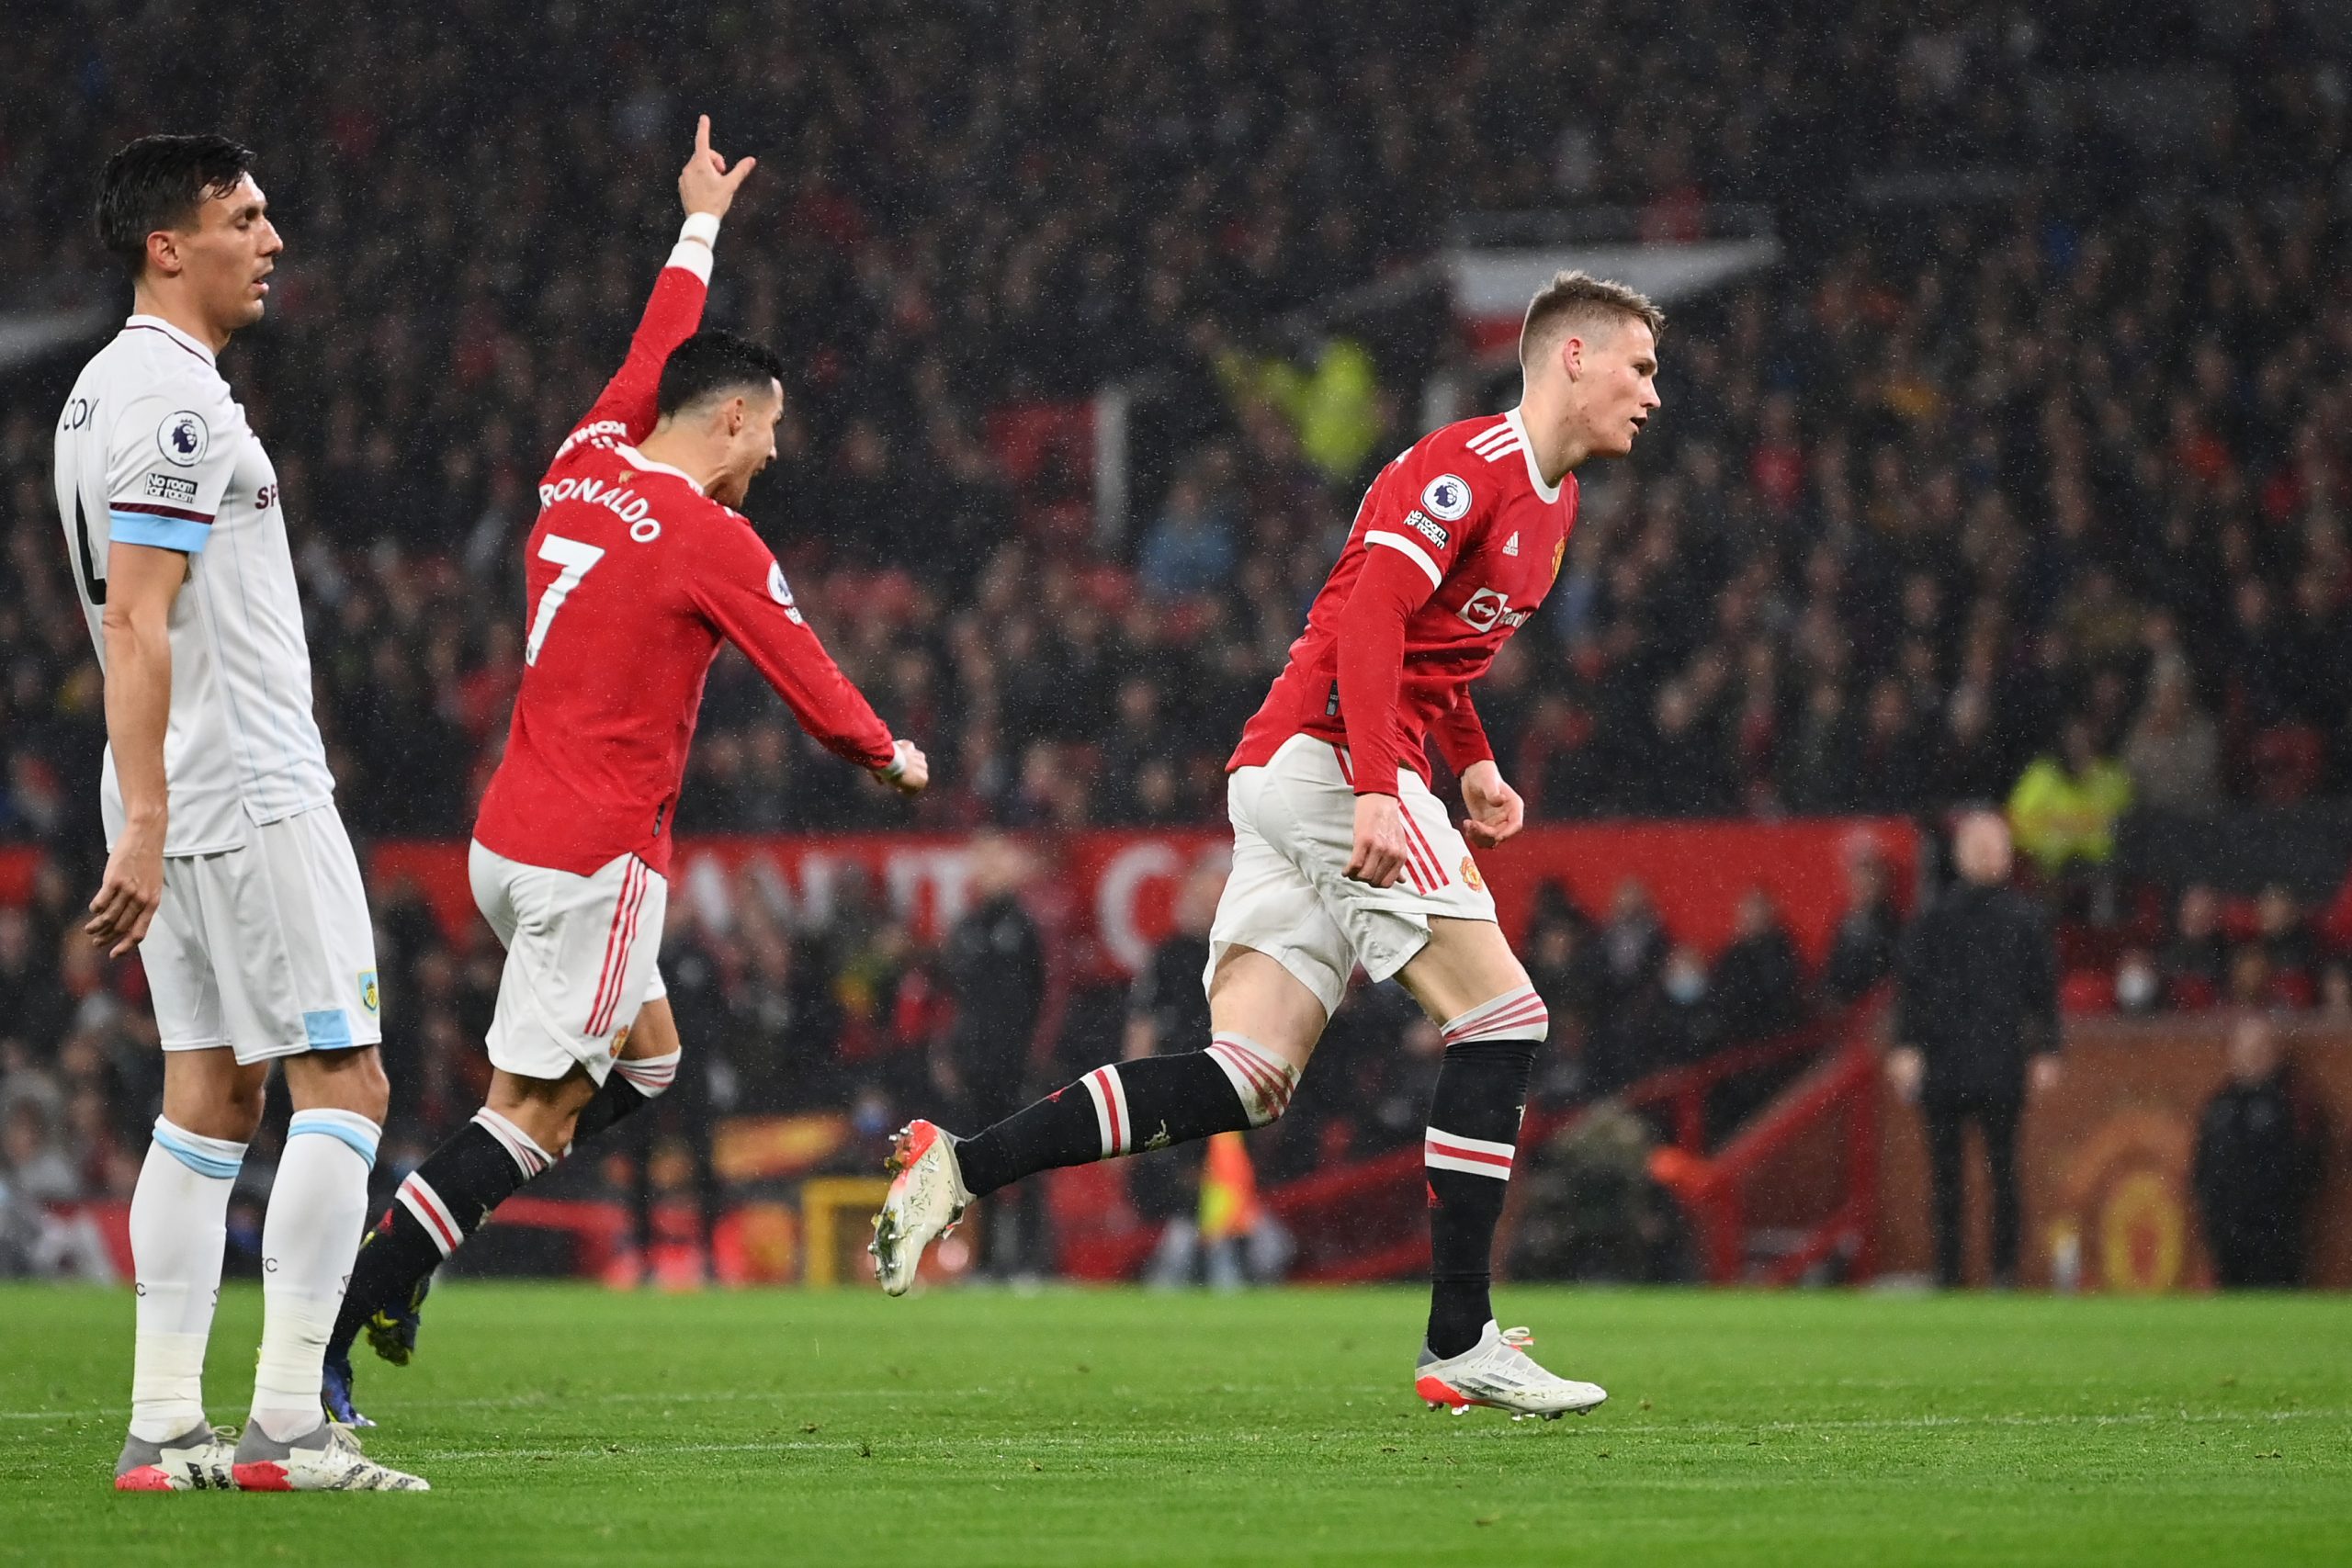 Scott McTominay produced a man of the match performance in the 3-1 victory against Burnley.